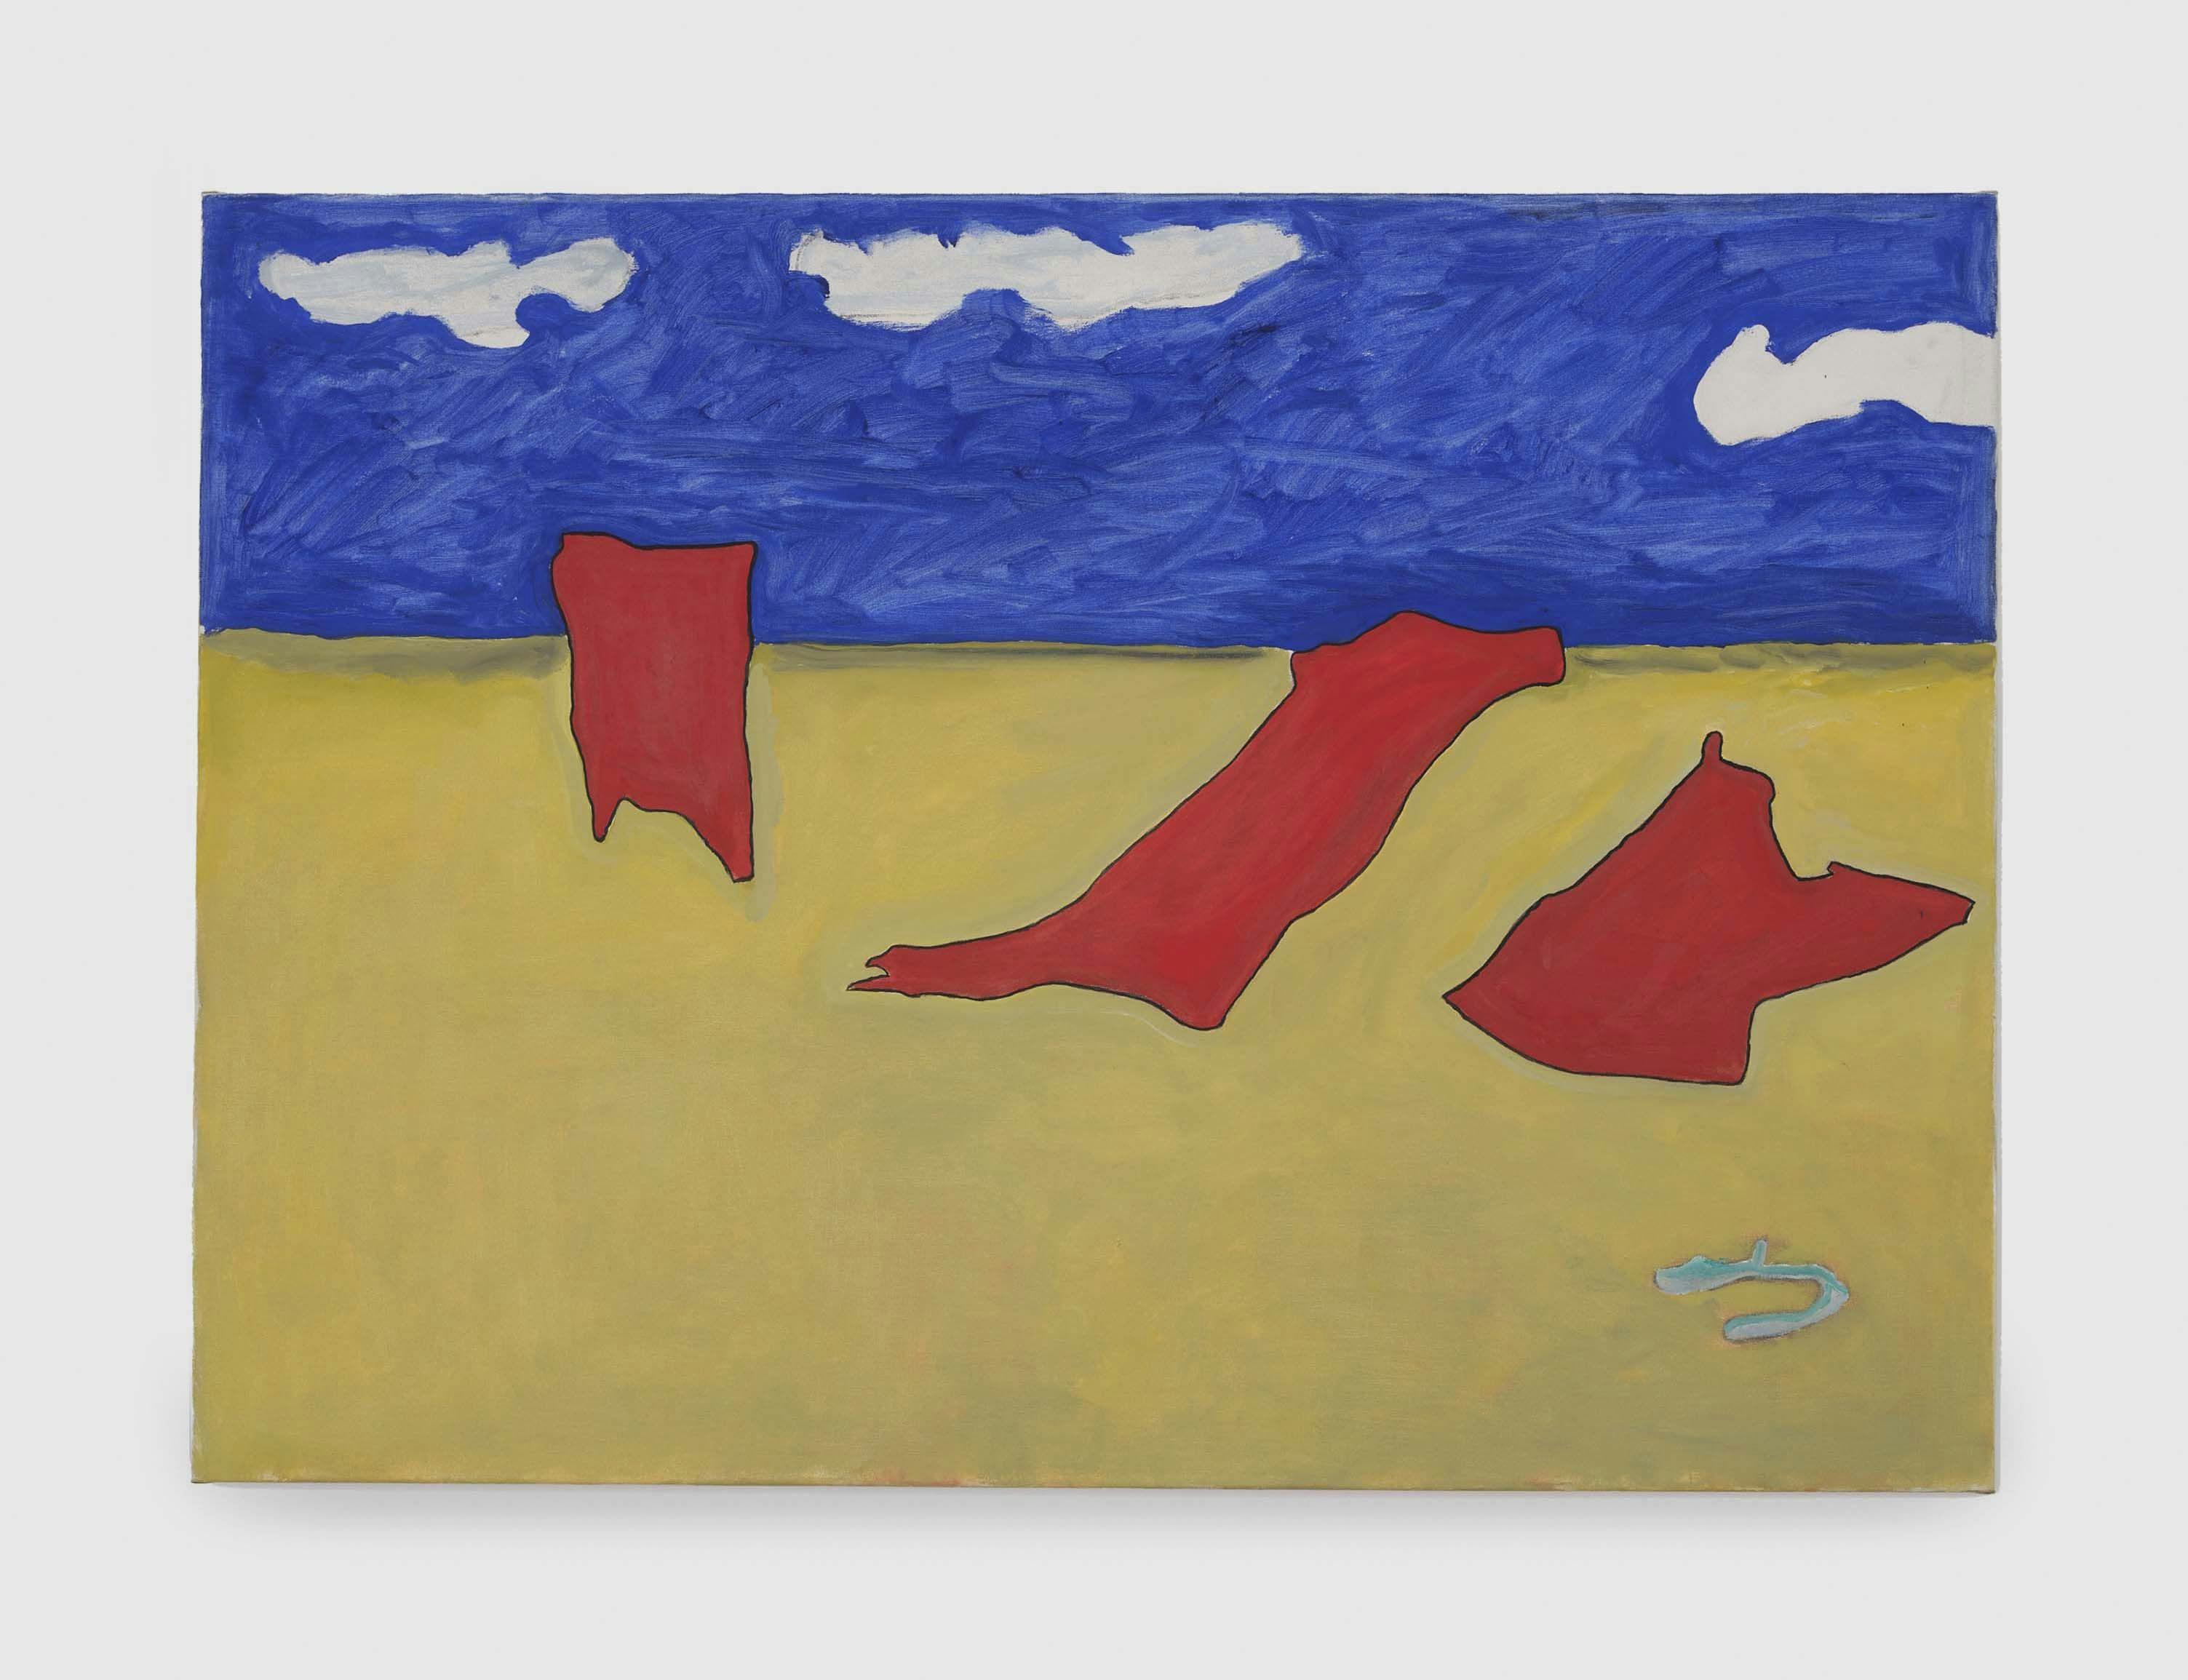 A painting by Raoul De Keyser, titled Three Scarecrows in a Gale, dated 2006.